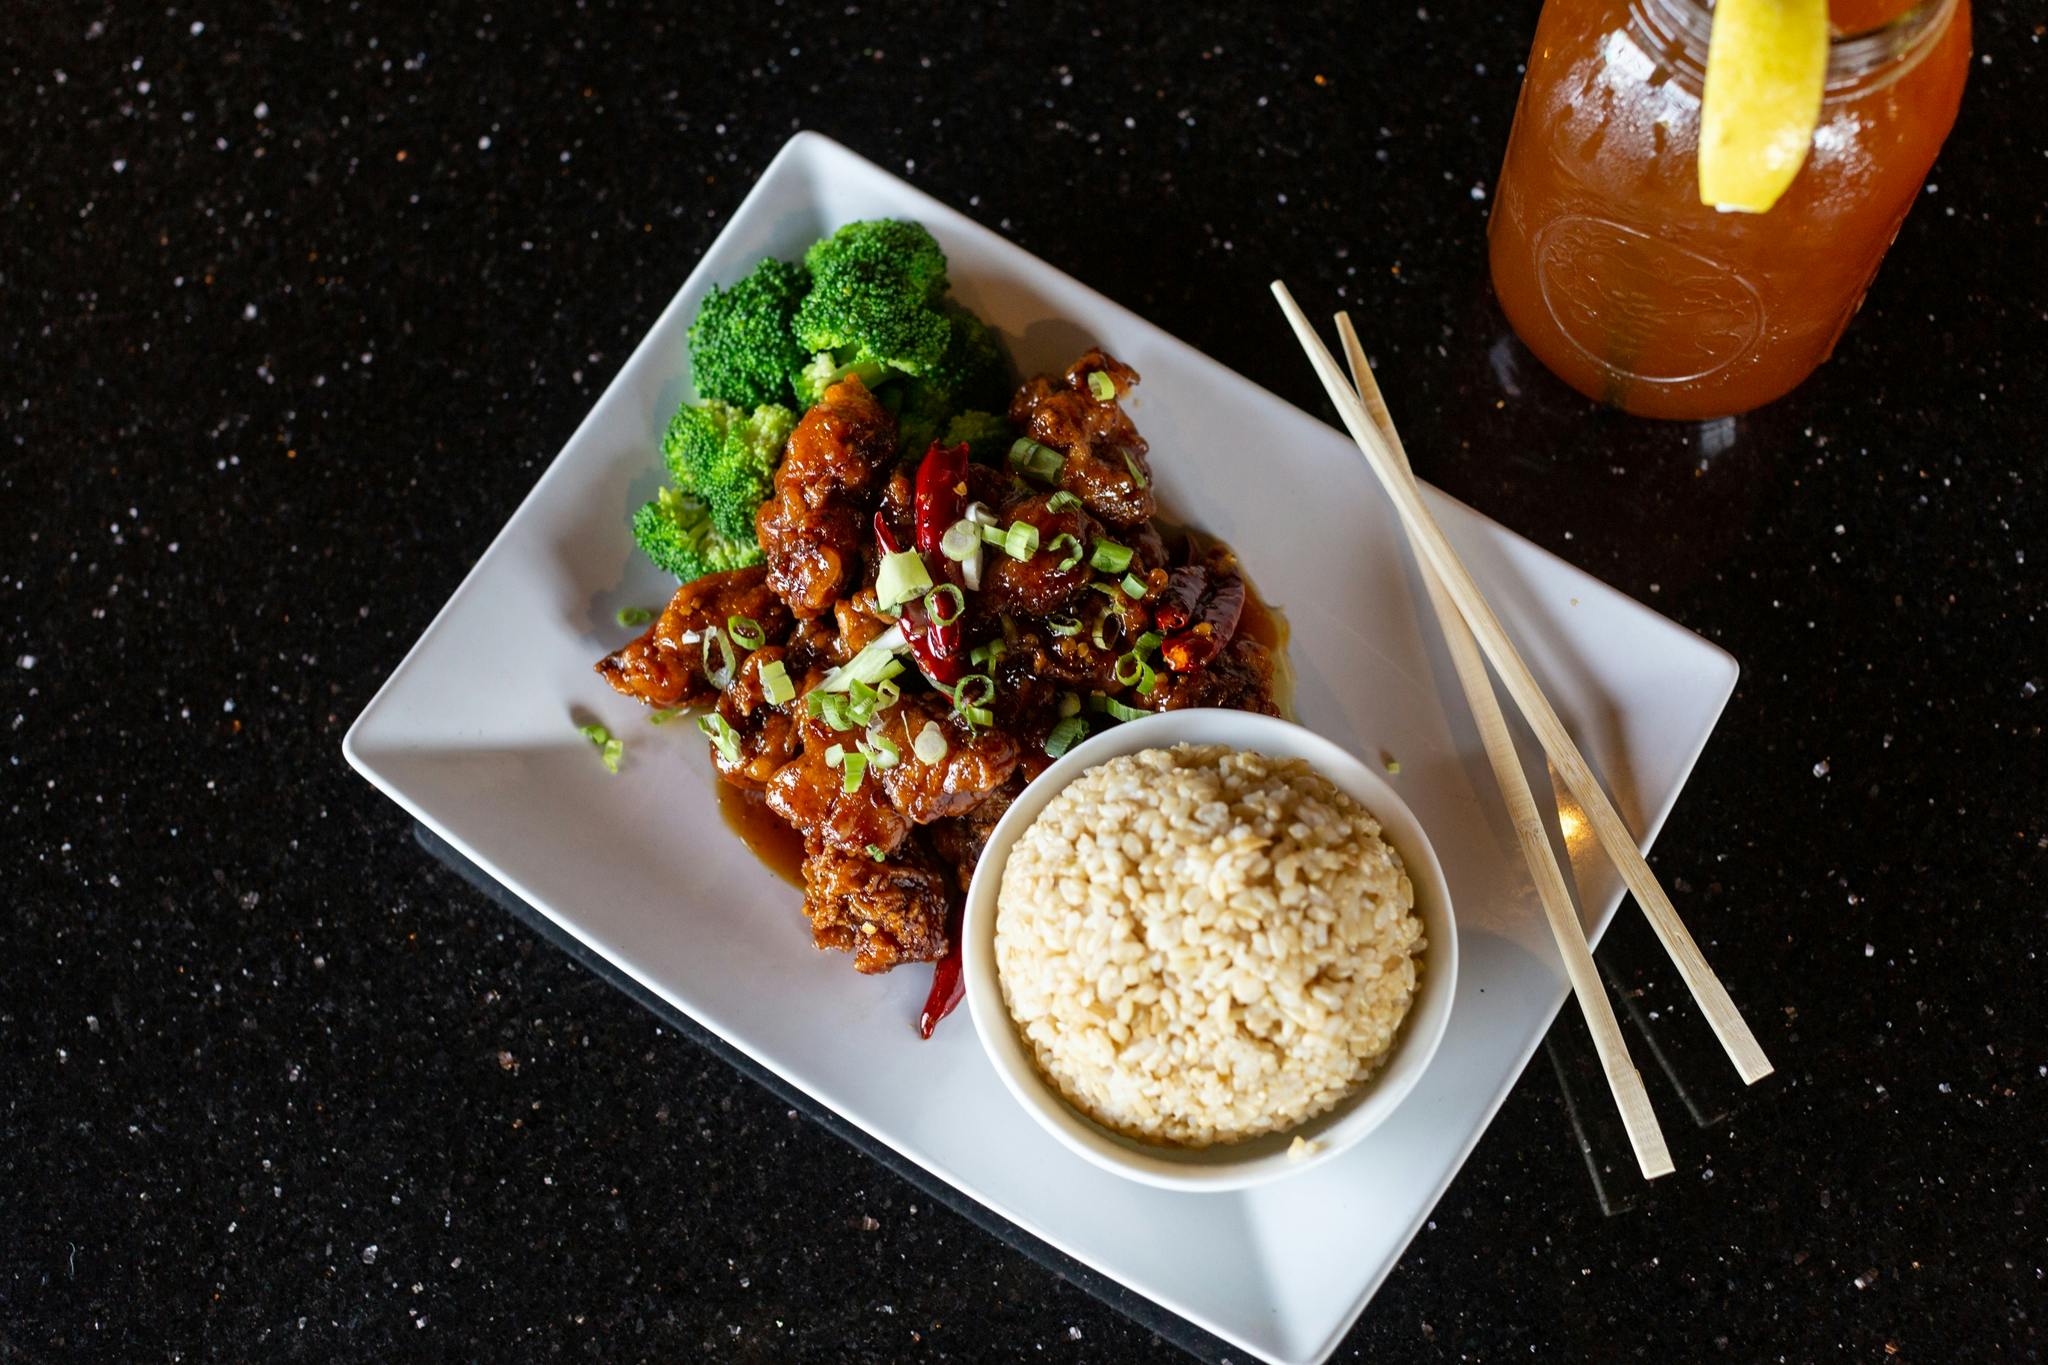 L4. General Tso's Chicken Lunch Special from Oriental Bistro & Grill in Lawrence, KS